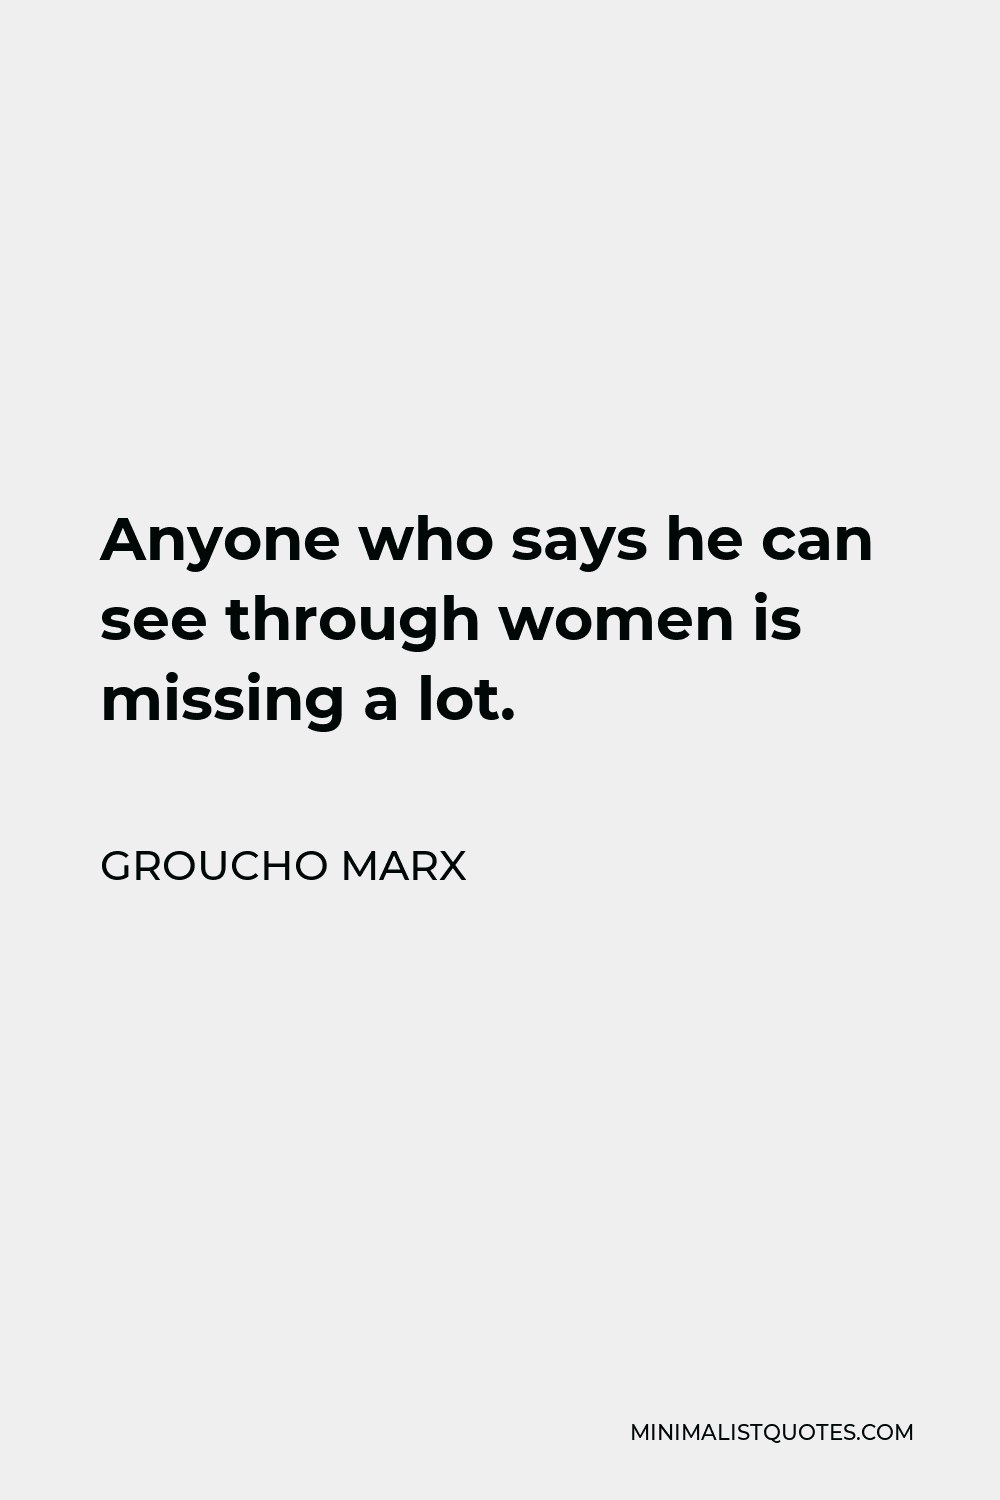 Groucho Marx Quote - Anyone who says he can see through women is missing a lot.